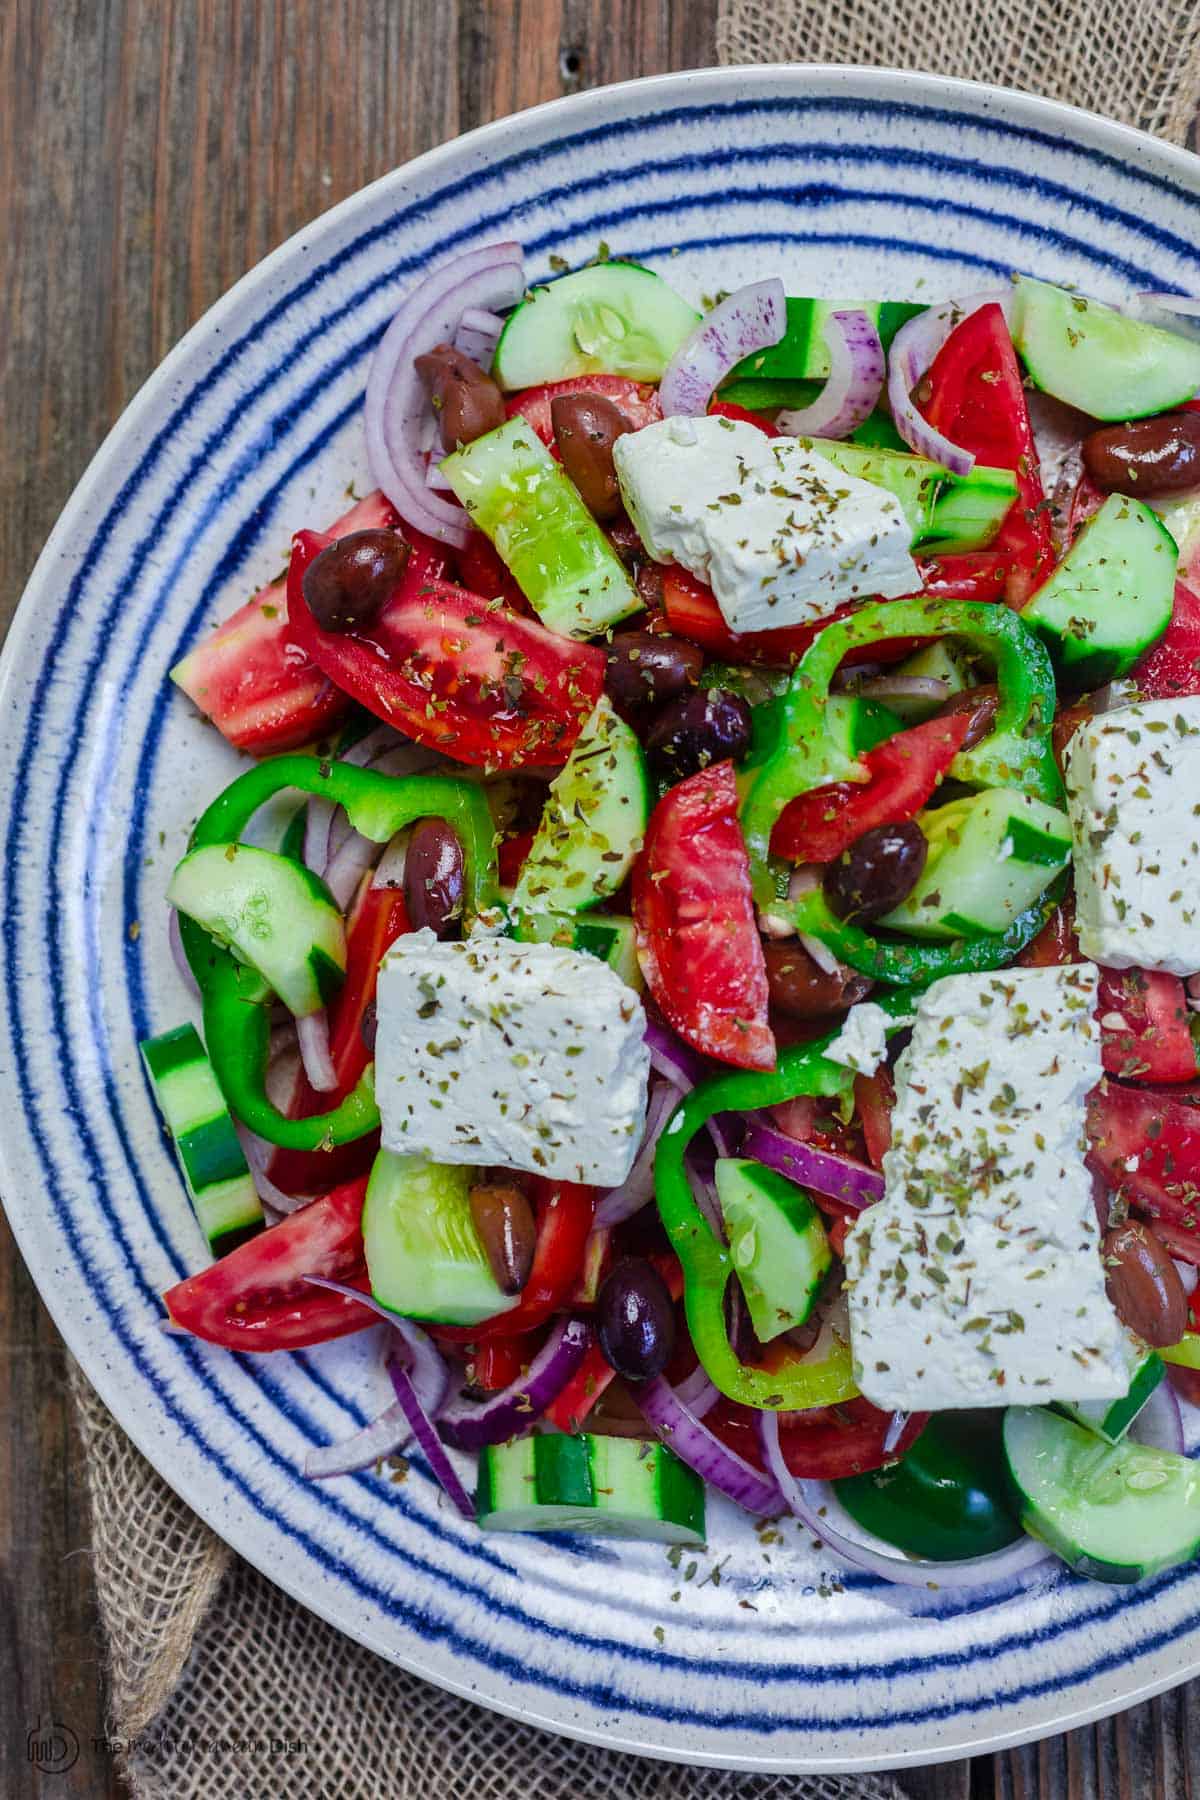 Real Reap Xx Video - The Real Deal Greek Salad Recipe (Traditional)| The Mediterranean Dish